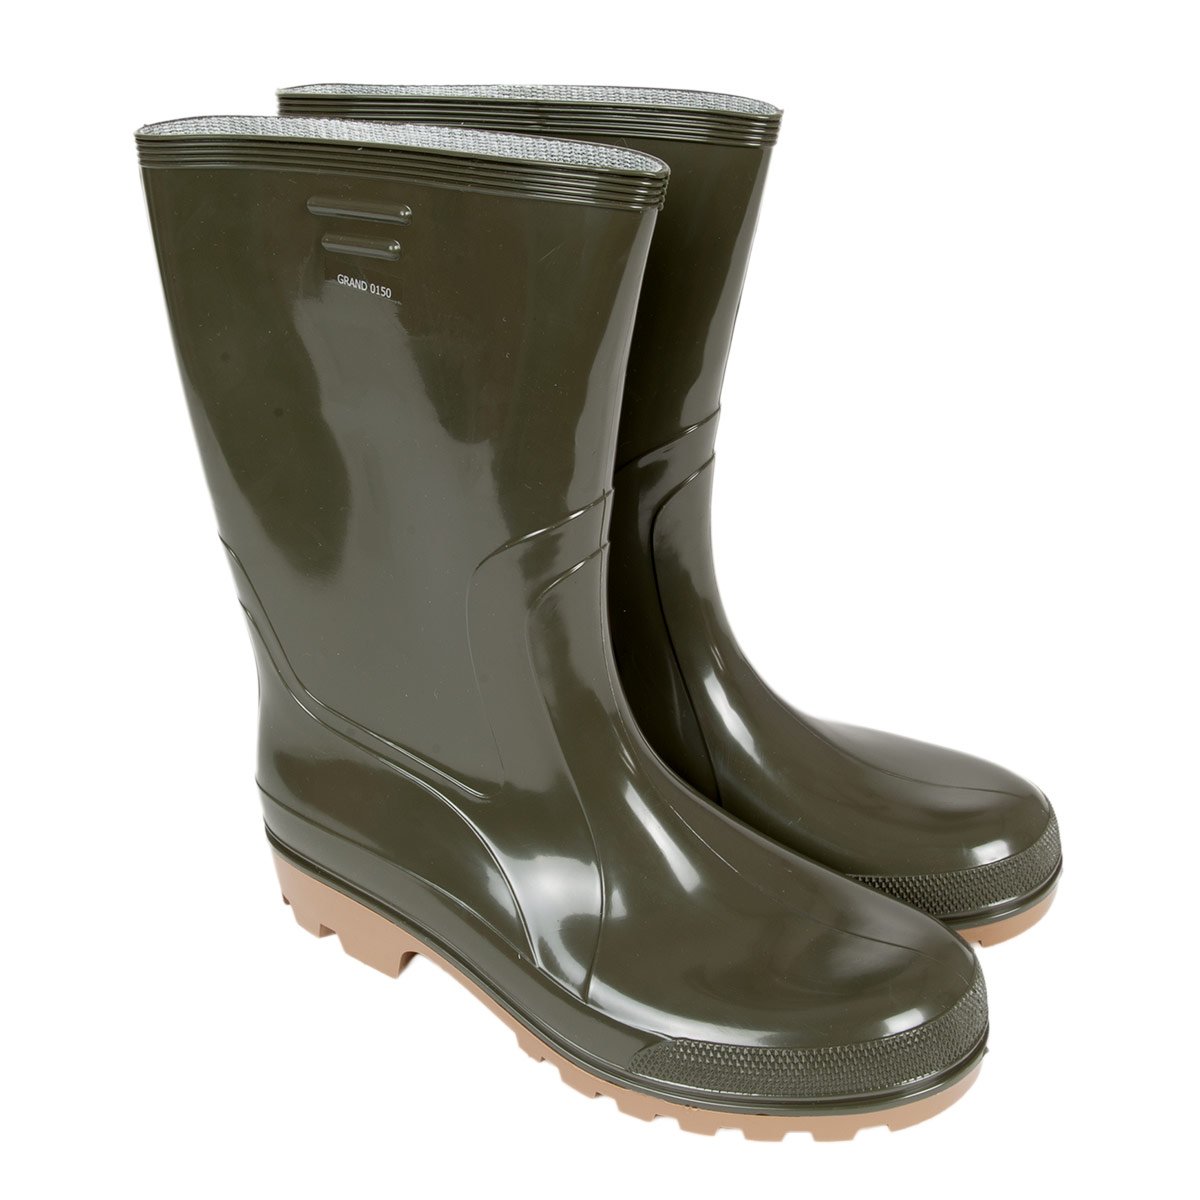 slip on rubber boots